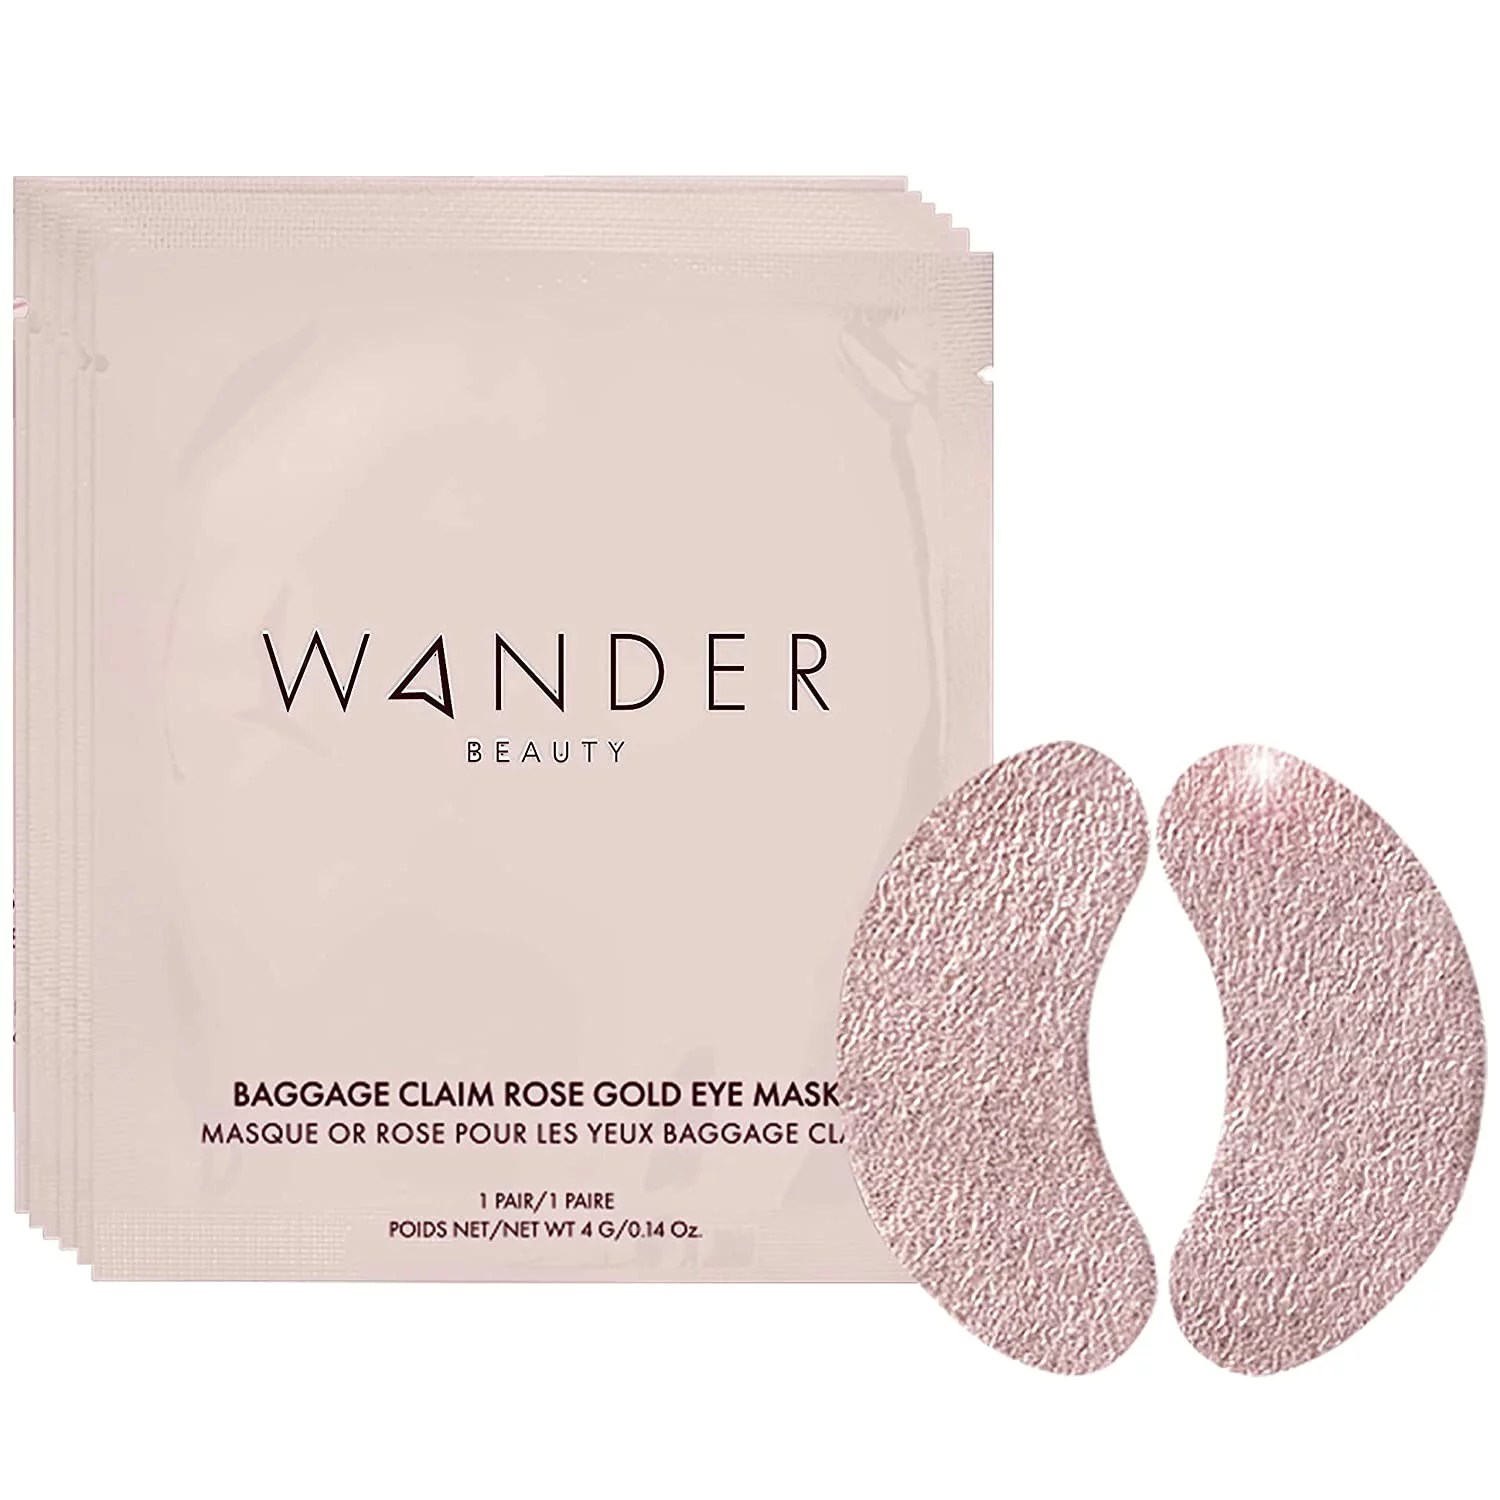 wander beauty under eye patches on a white background, a self-care gift you can find on amazon